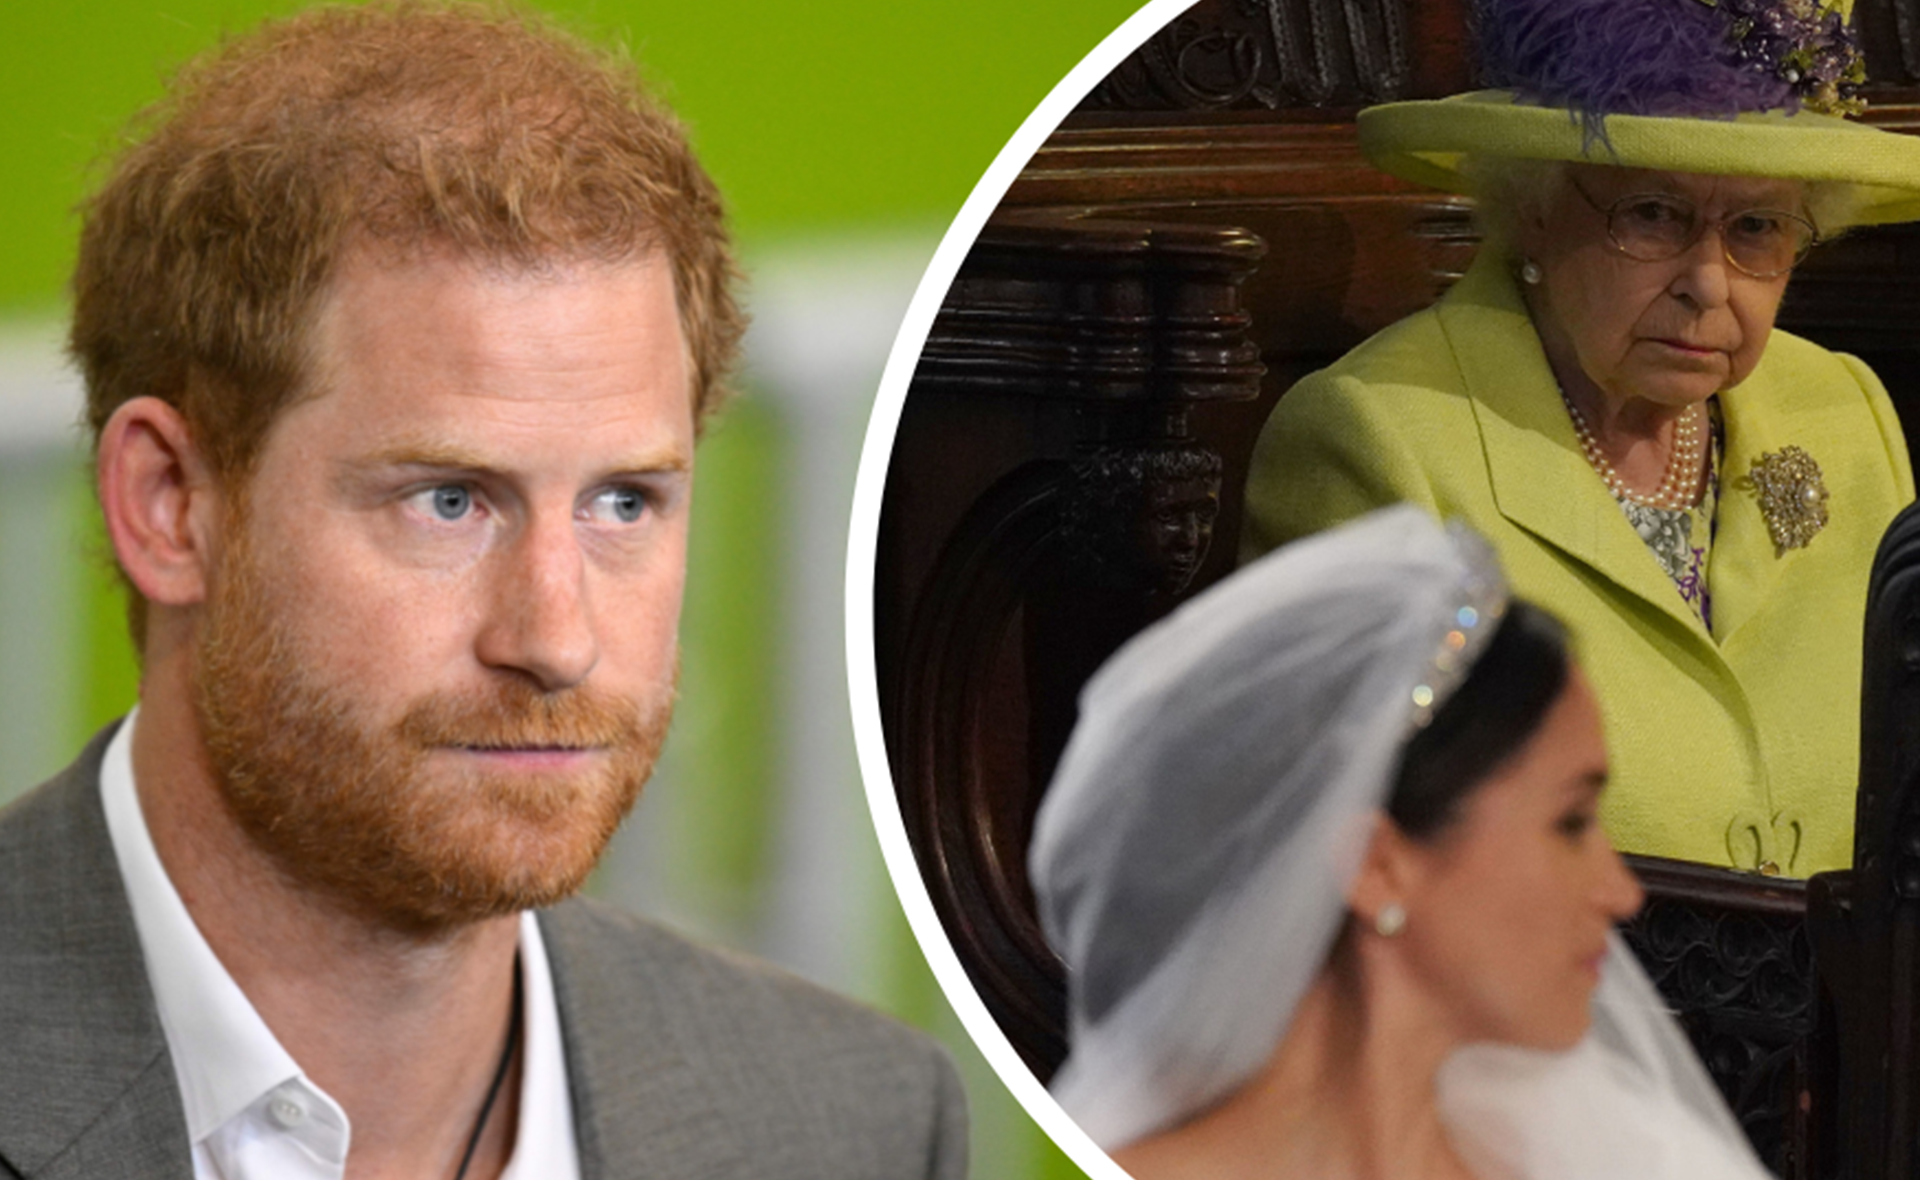 Prince Harry became outraged at the Queen when she denied Meghan’s wedding request